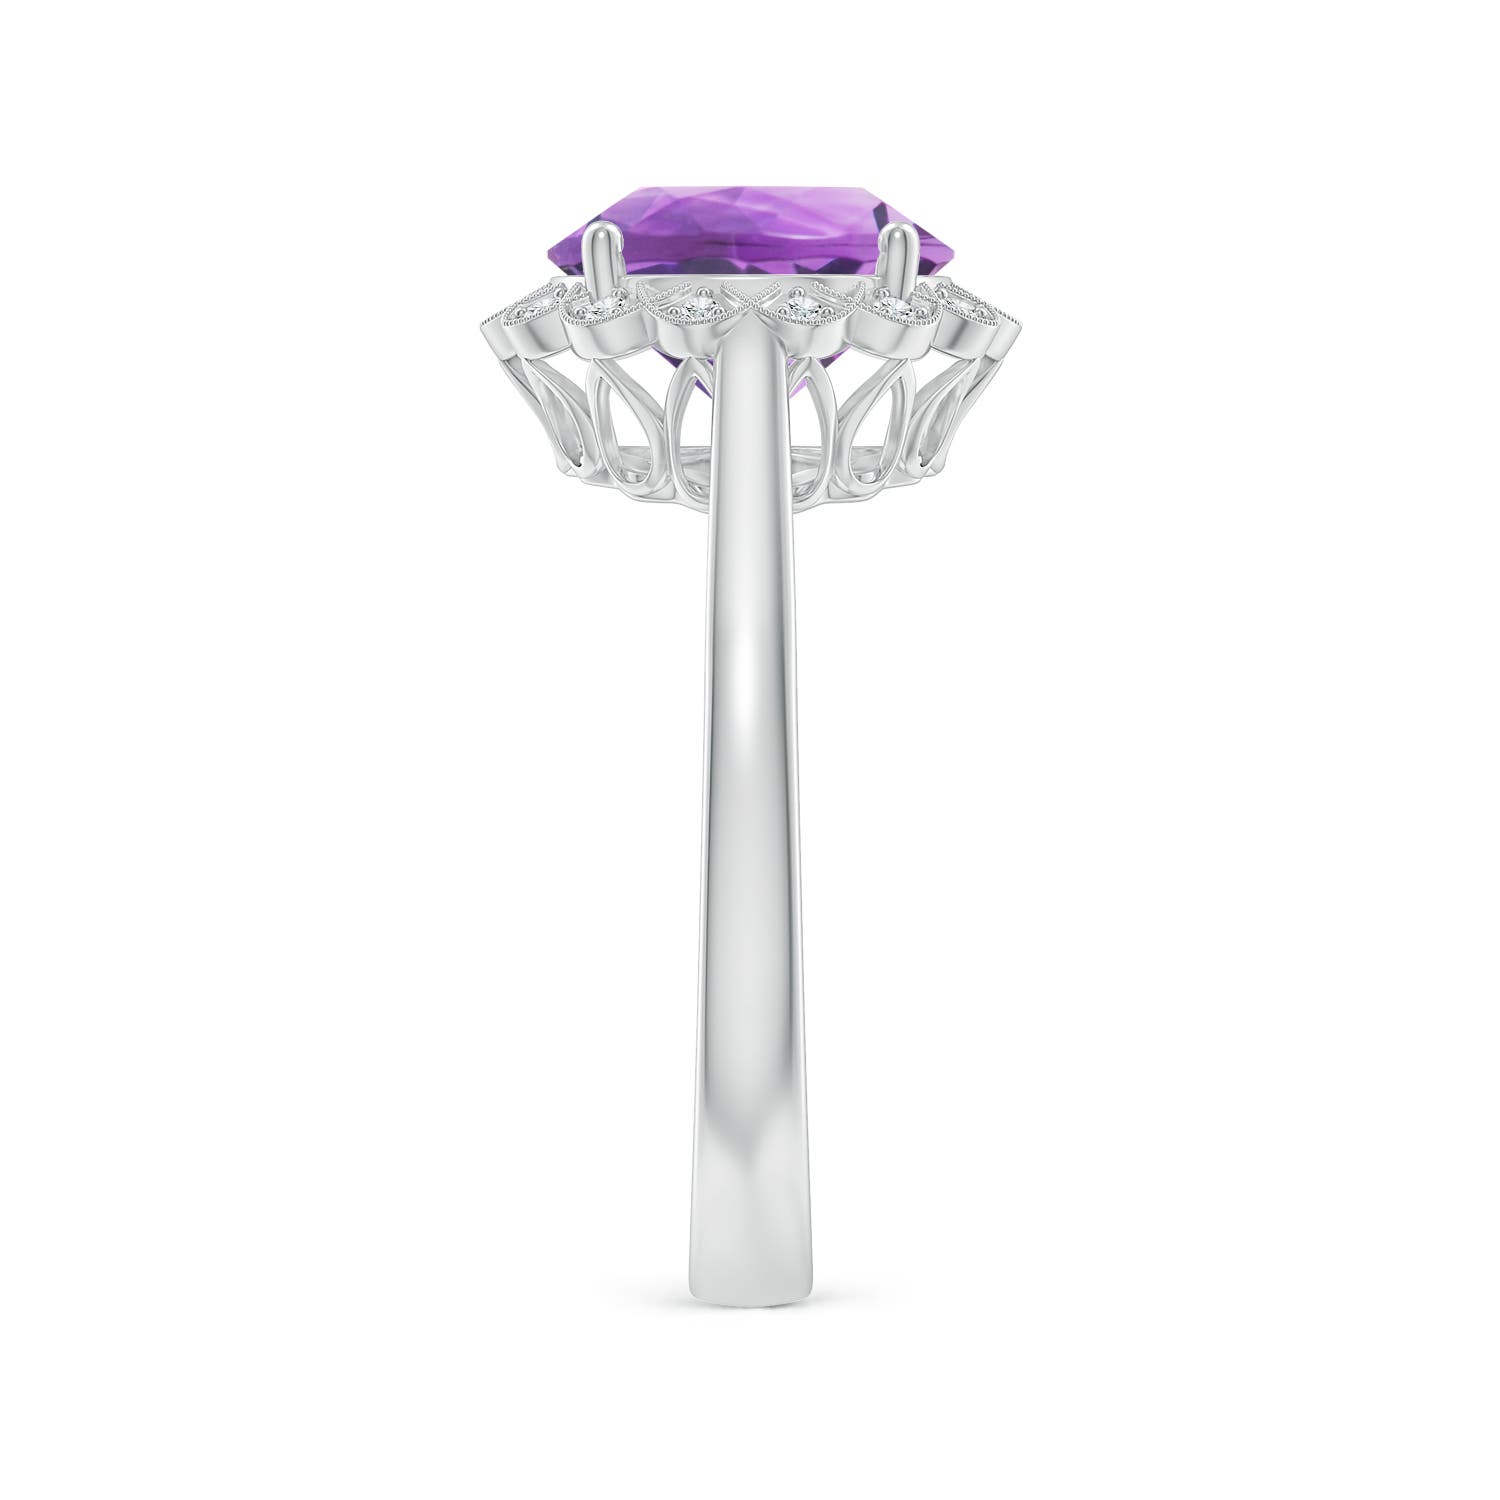 A - Amethyst / 2.52 CT / 14 KT White Gold